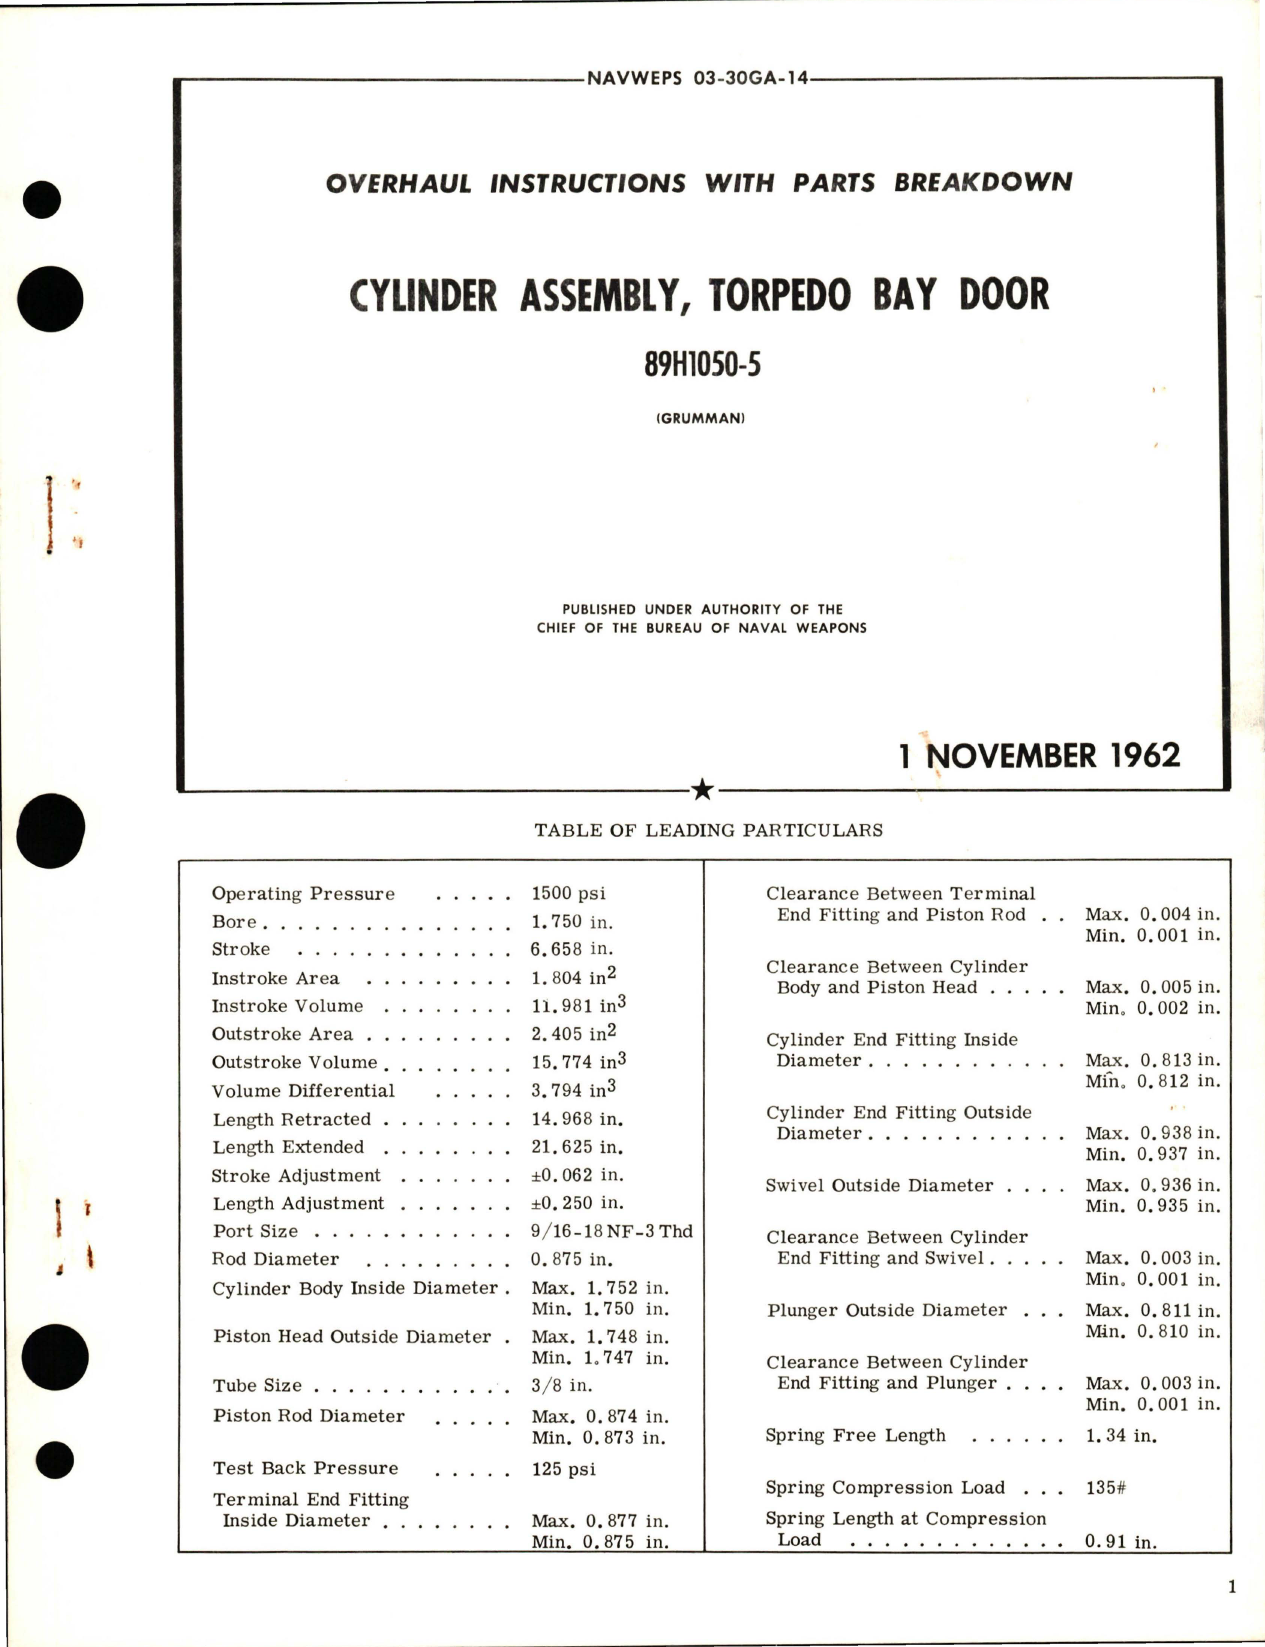 Sample page 1 from AirCorps Library document: Overhaul Instructions with Parts Breakdown for Torpedo Bay Door Cylinder Assembly - 89H1050-5